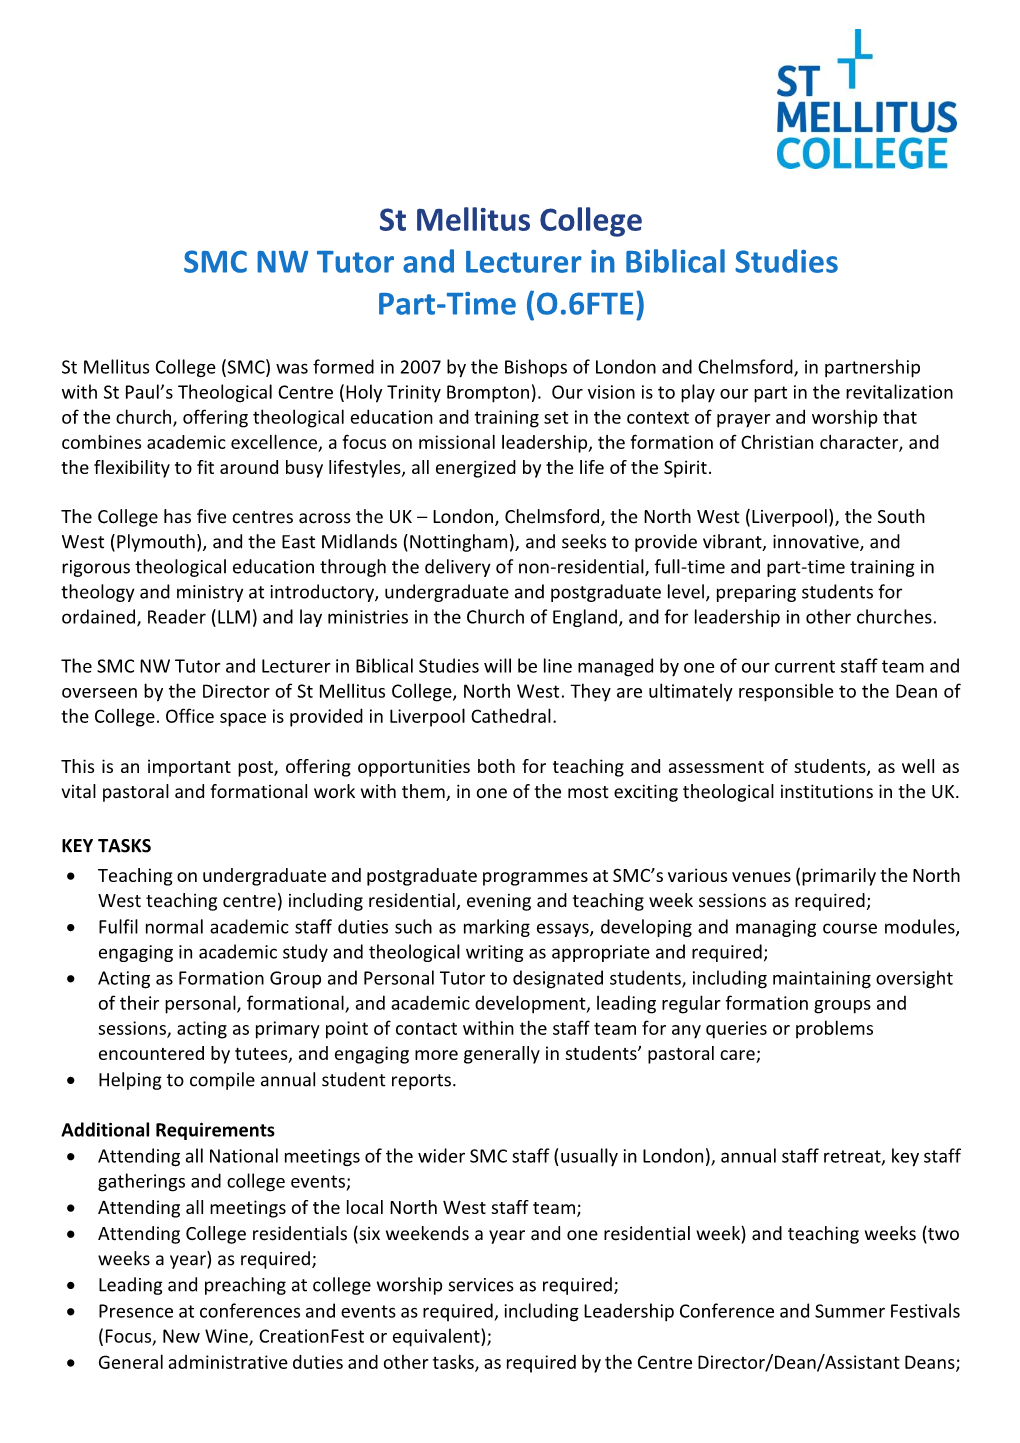 St Mellitus College SMC NW Tutor and Lecturer in Biblical Studies Part-Time (O.6FTE)